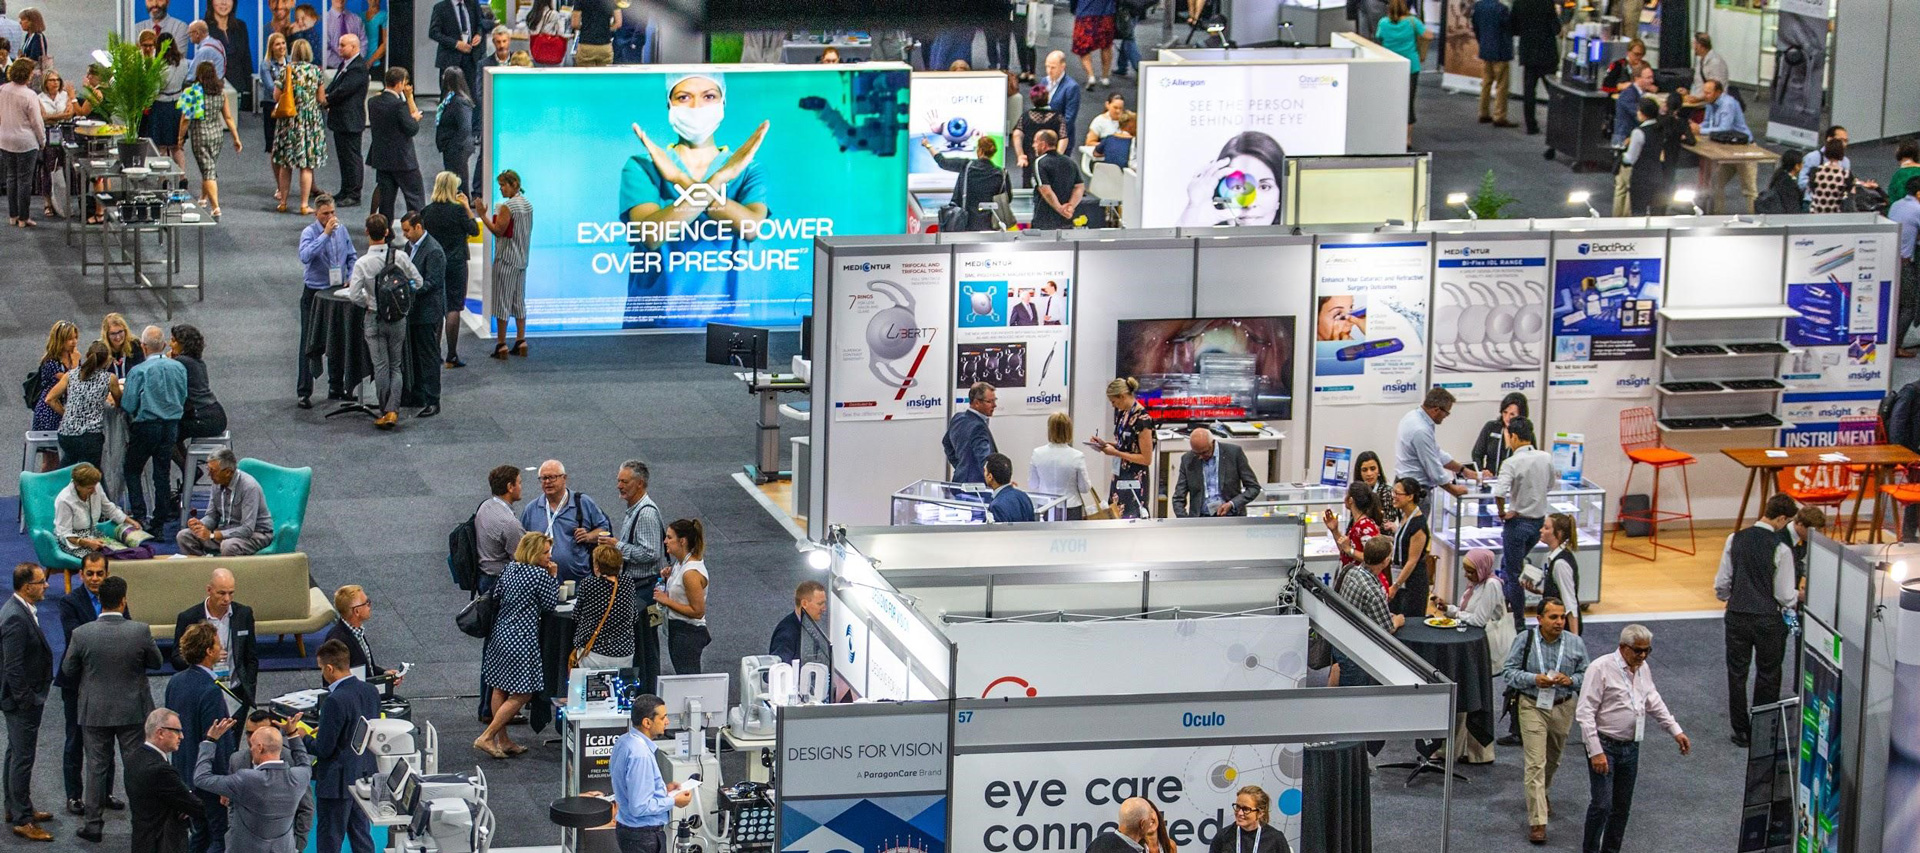 Exhibitors: Get More Traffic To Your Booth With These Tips